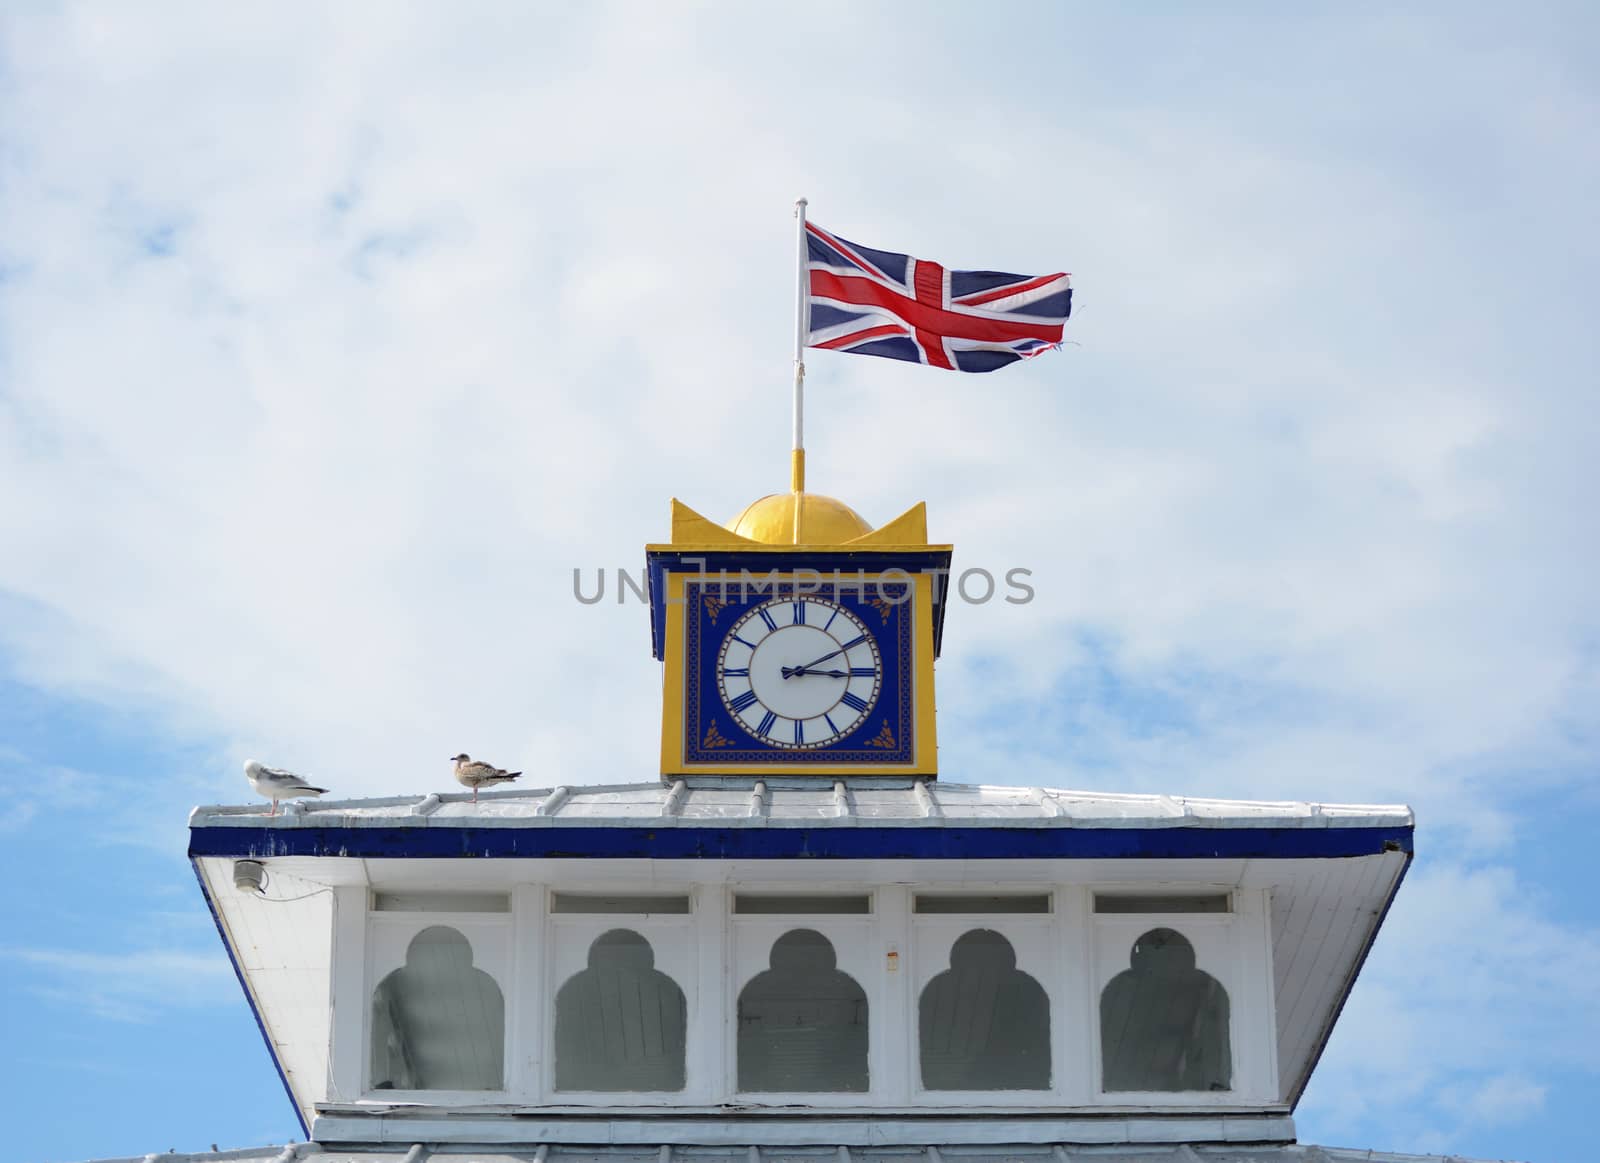 The Union Jack flag flies atop the clock tower of Eastbourne pie by sarahdoow